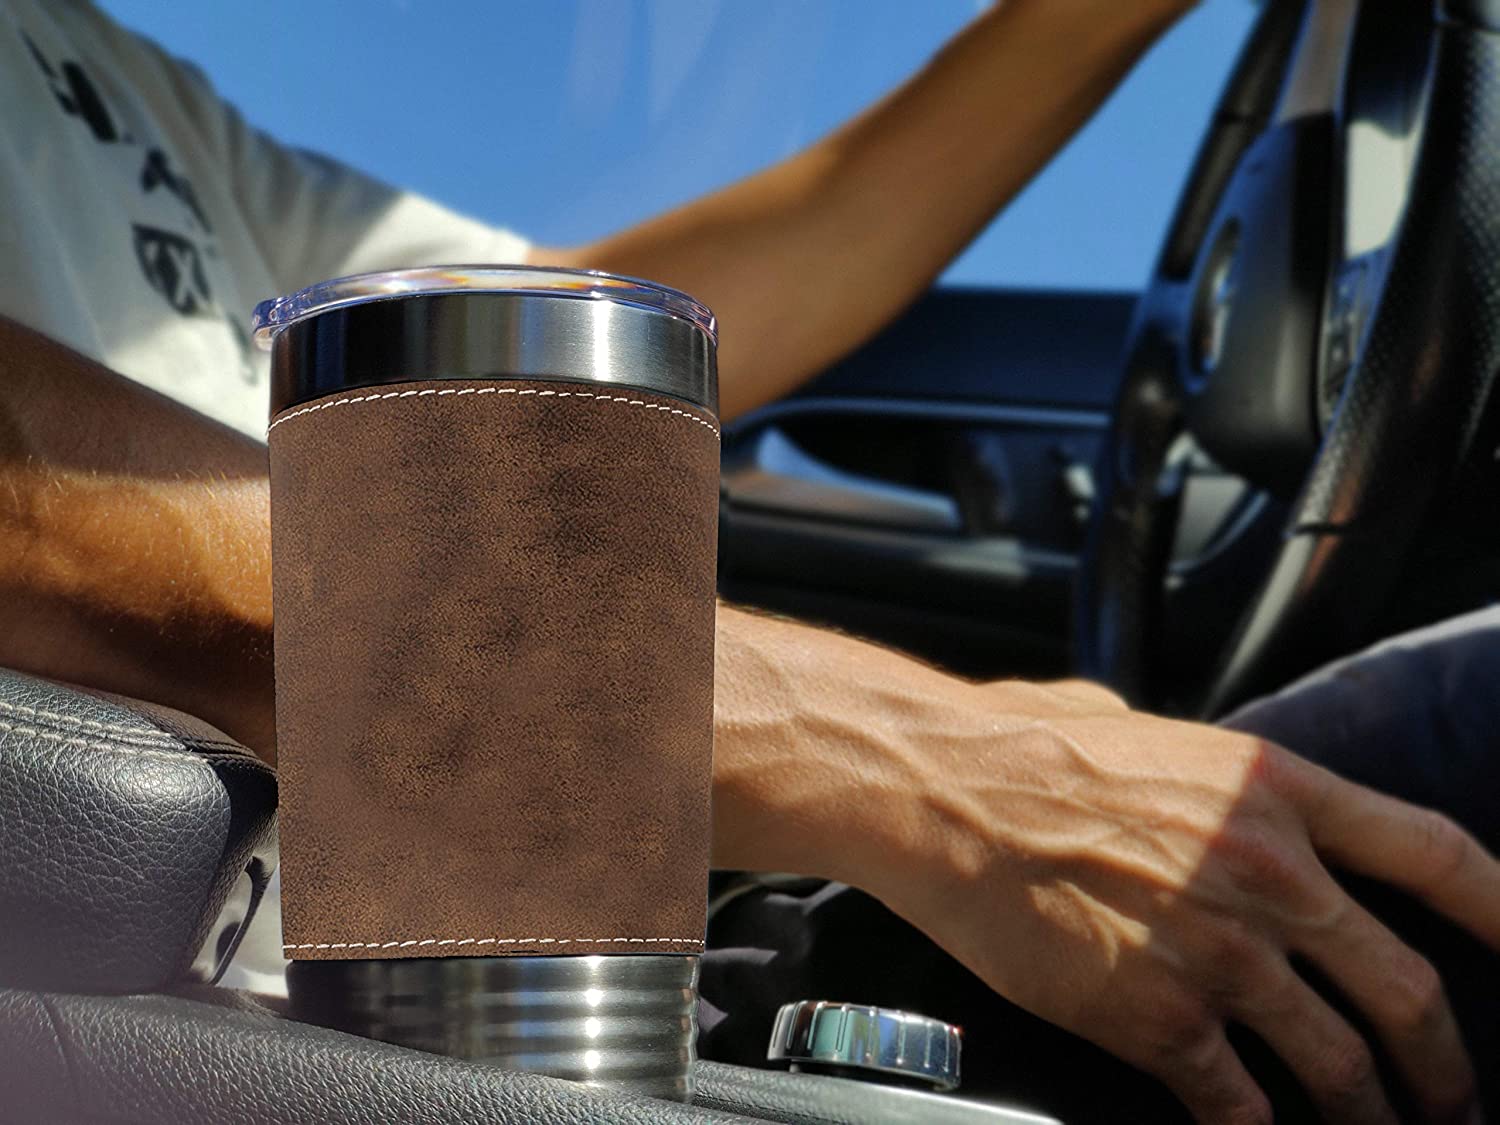 20oz Faux Leather Tumbler Mug, Military Helicopter 2, Personalized Engraving Included - LaserGram Custom Engraved Gifts